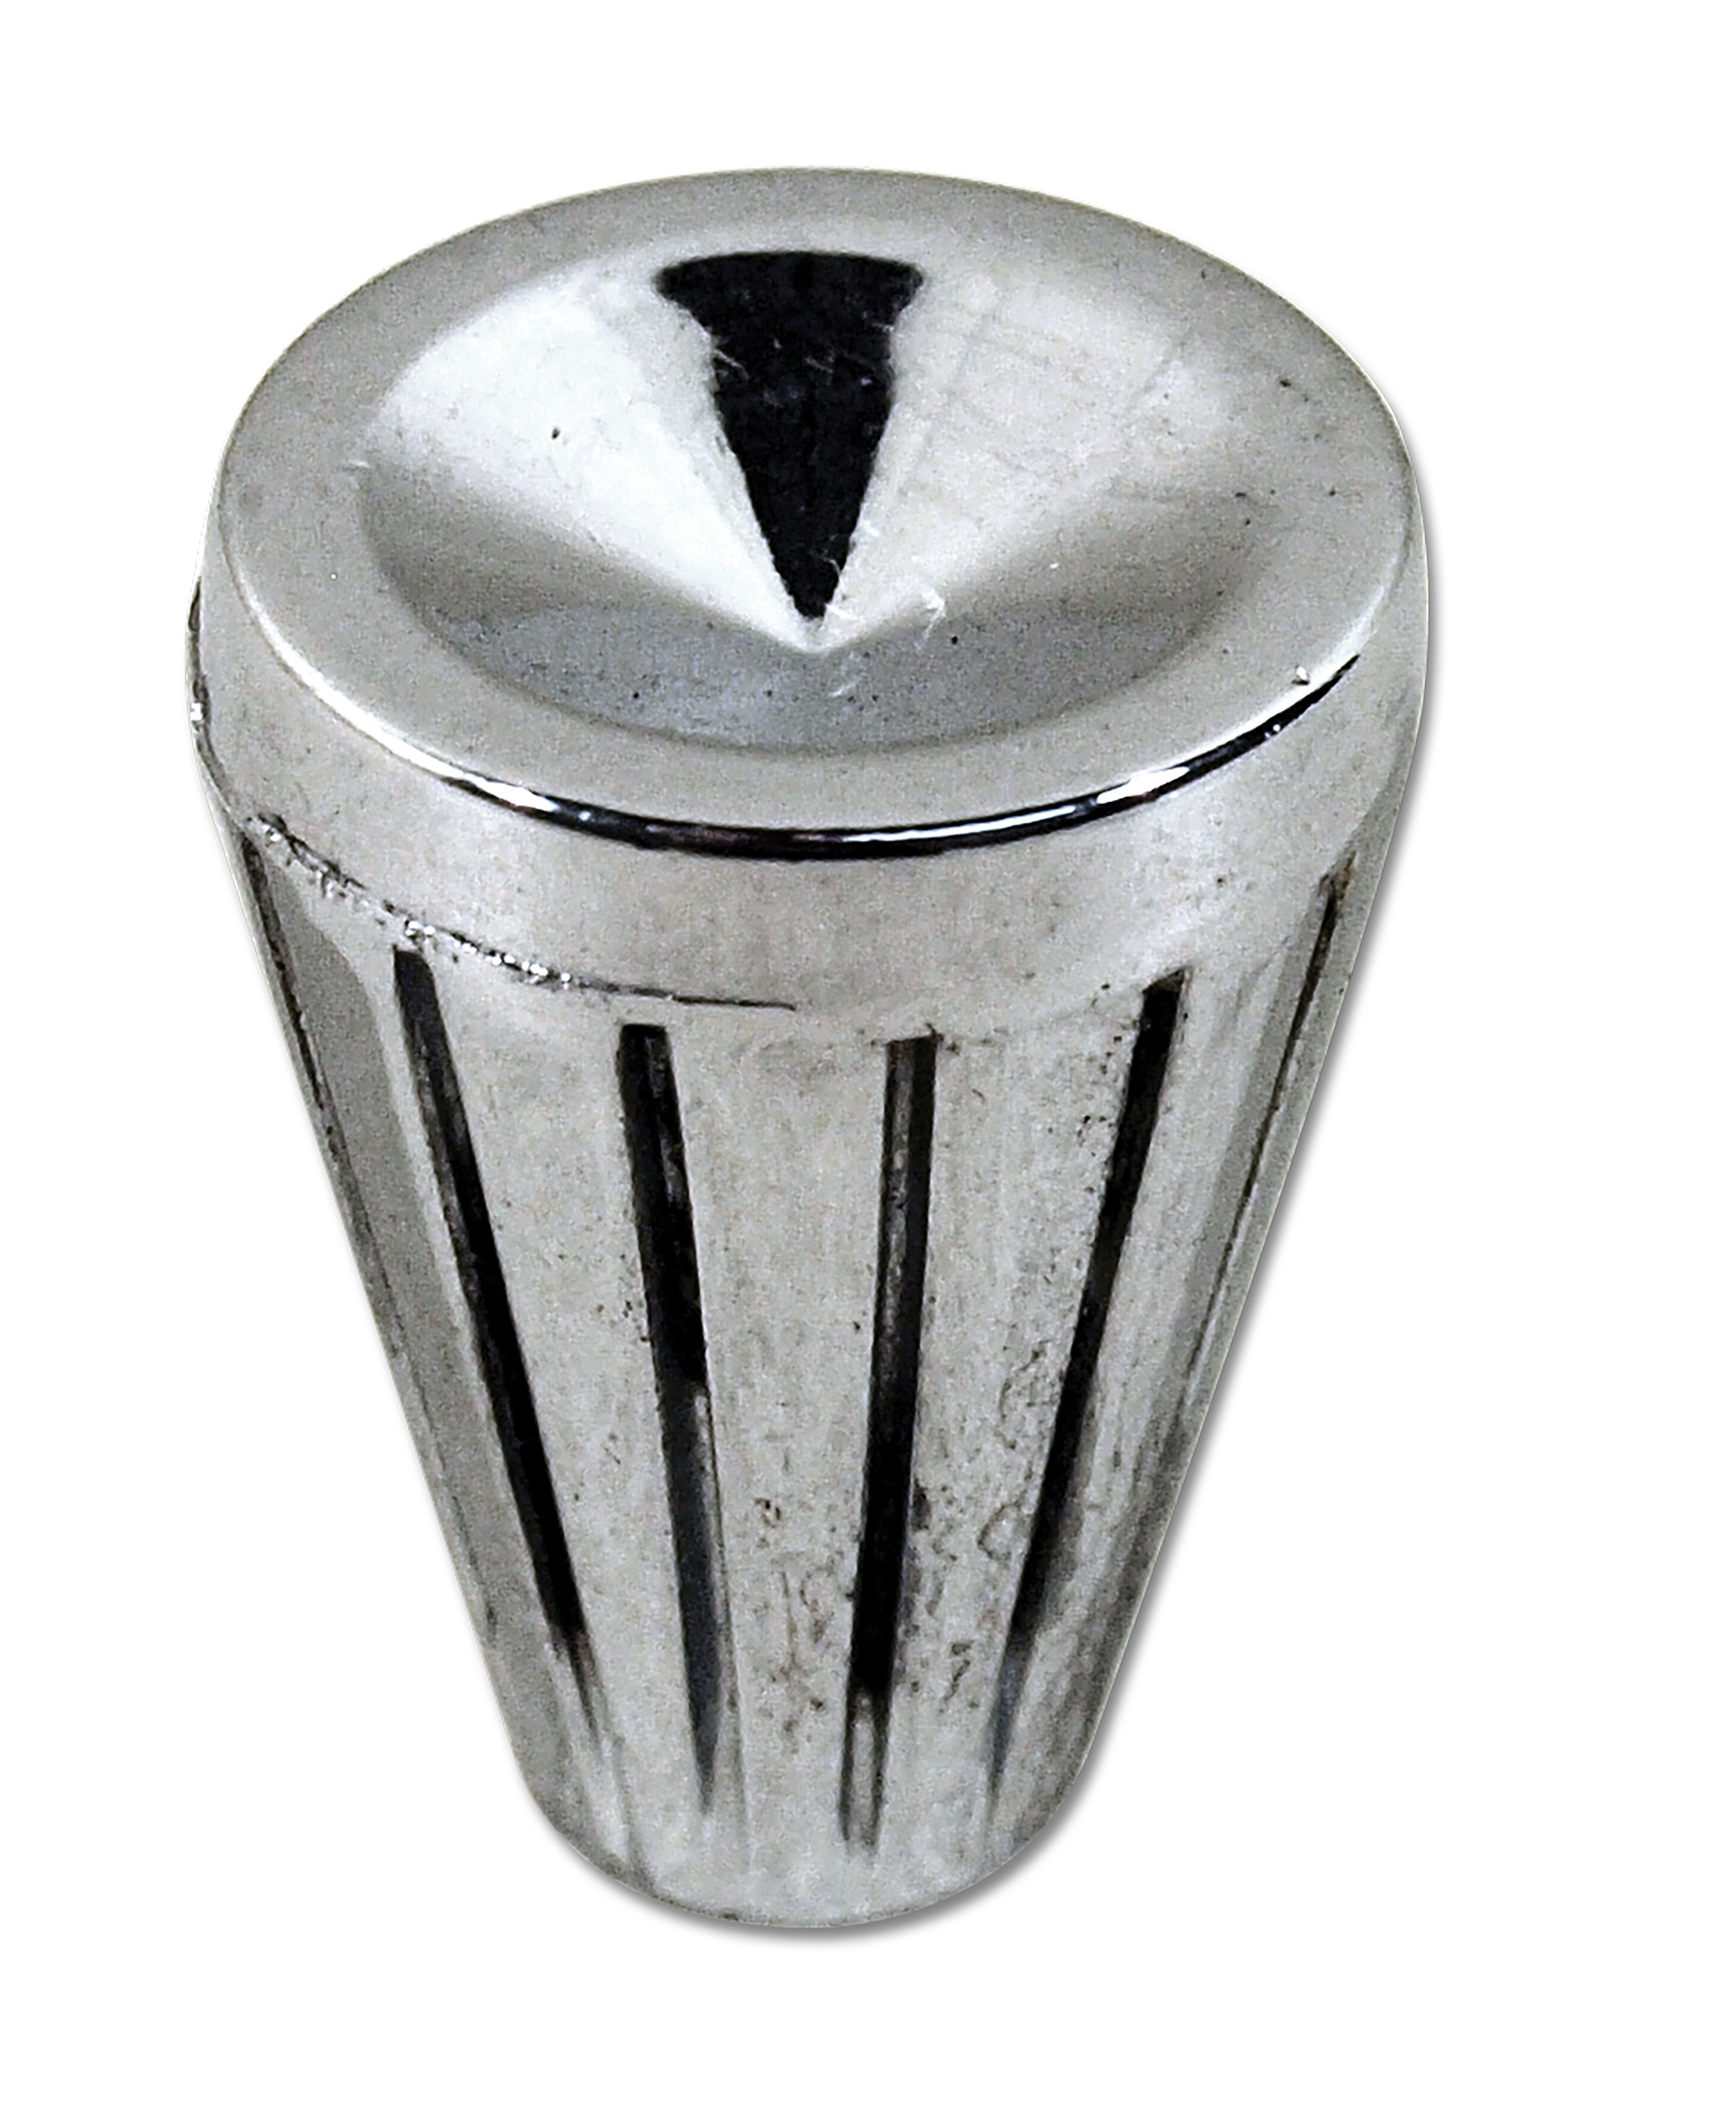 C2 1963-1964 Chevrolet Corvette Heater Knob. Defroster/Air Conditioning (Screw On Type) - Auto Accessories of America